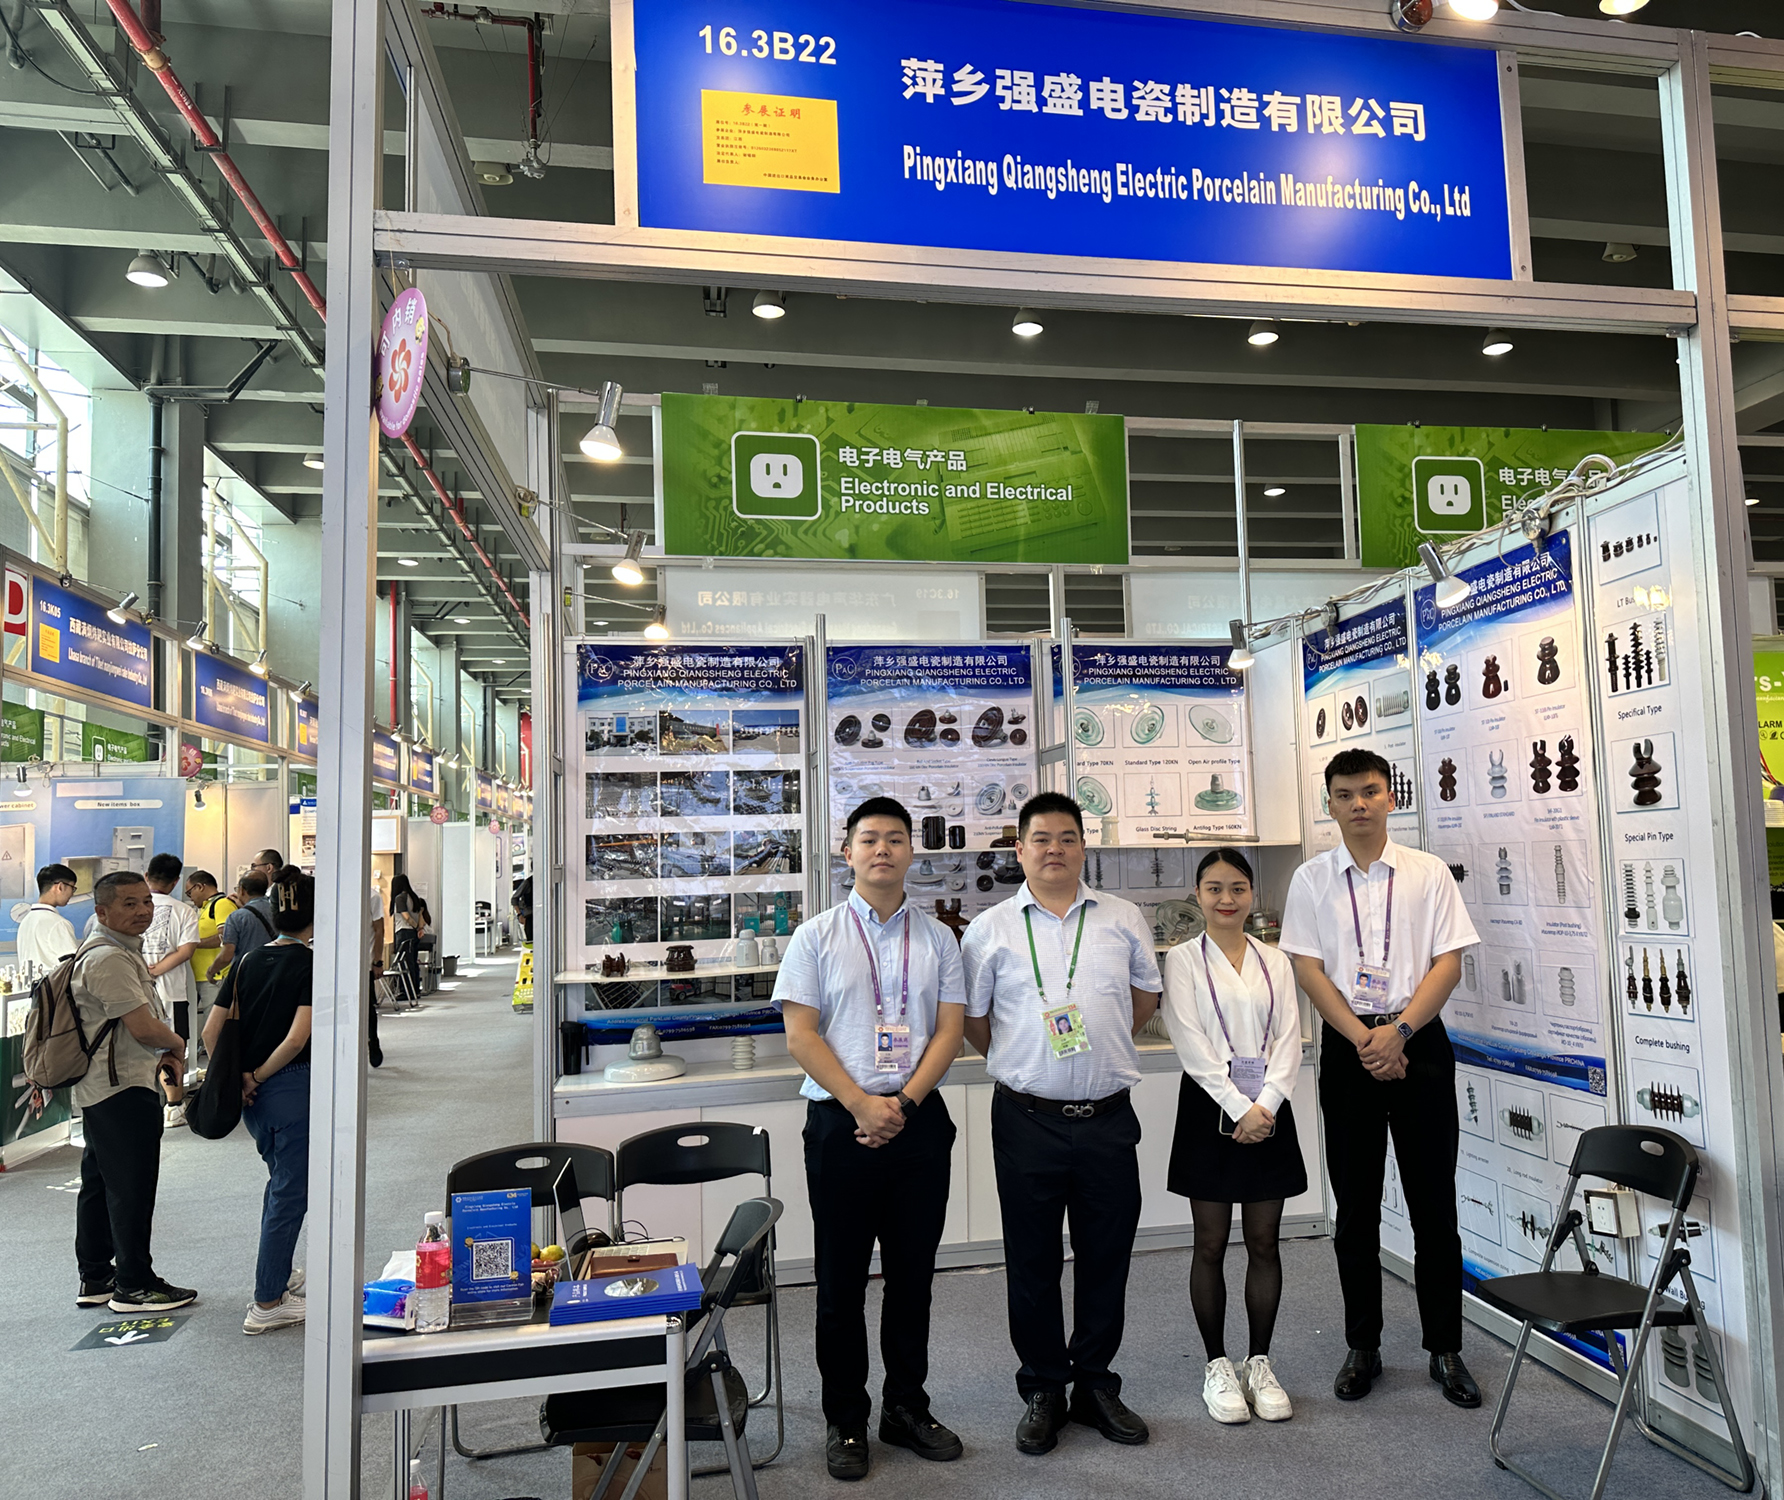 We are delighted to meet so many friends from around the world at the 134th Canton Fair